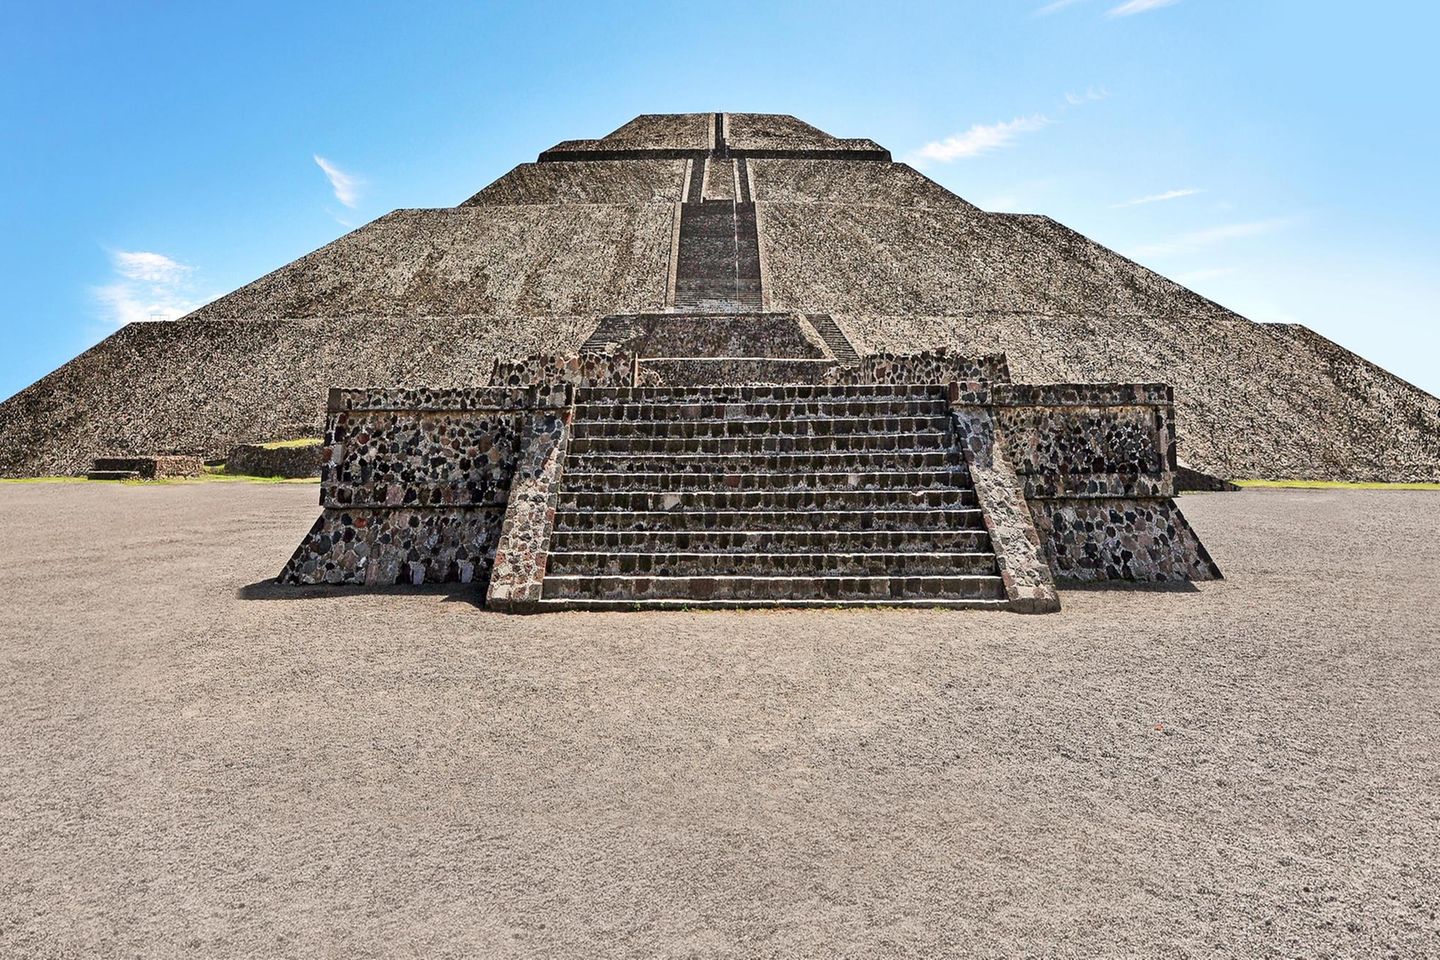 The pyramid of the Sun ancient ruins building  in Teotihuacan, Mexico. (Photo by: Avalon/Universal Images Group via Getty Images)